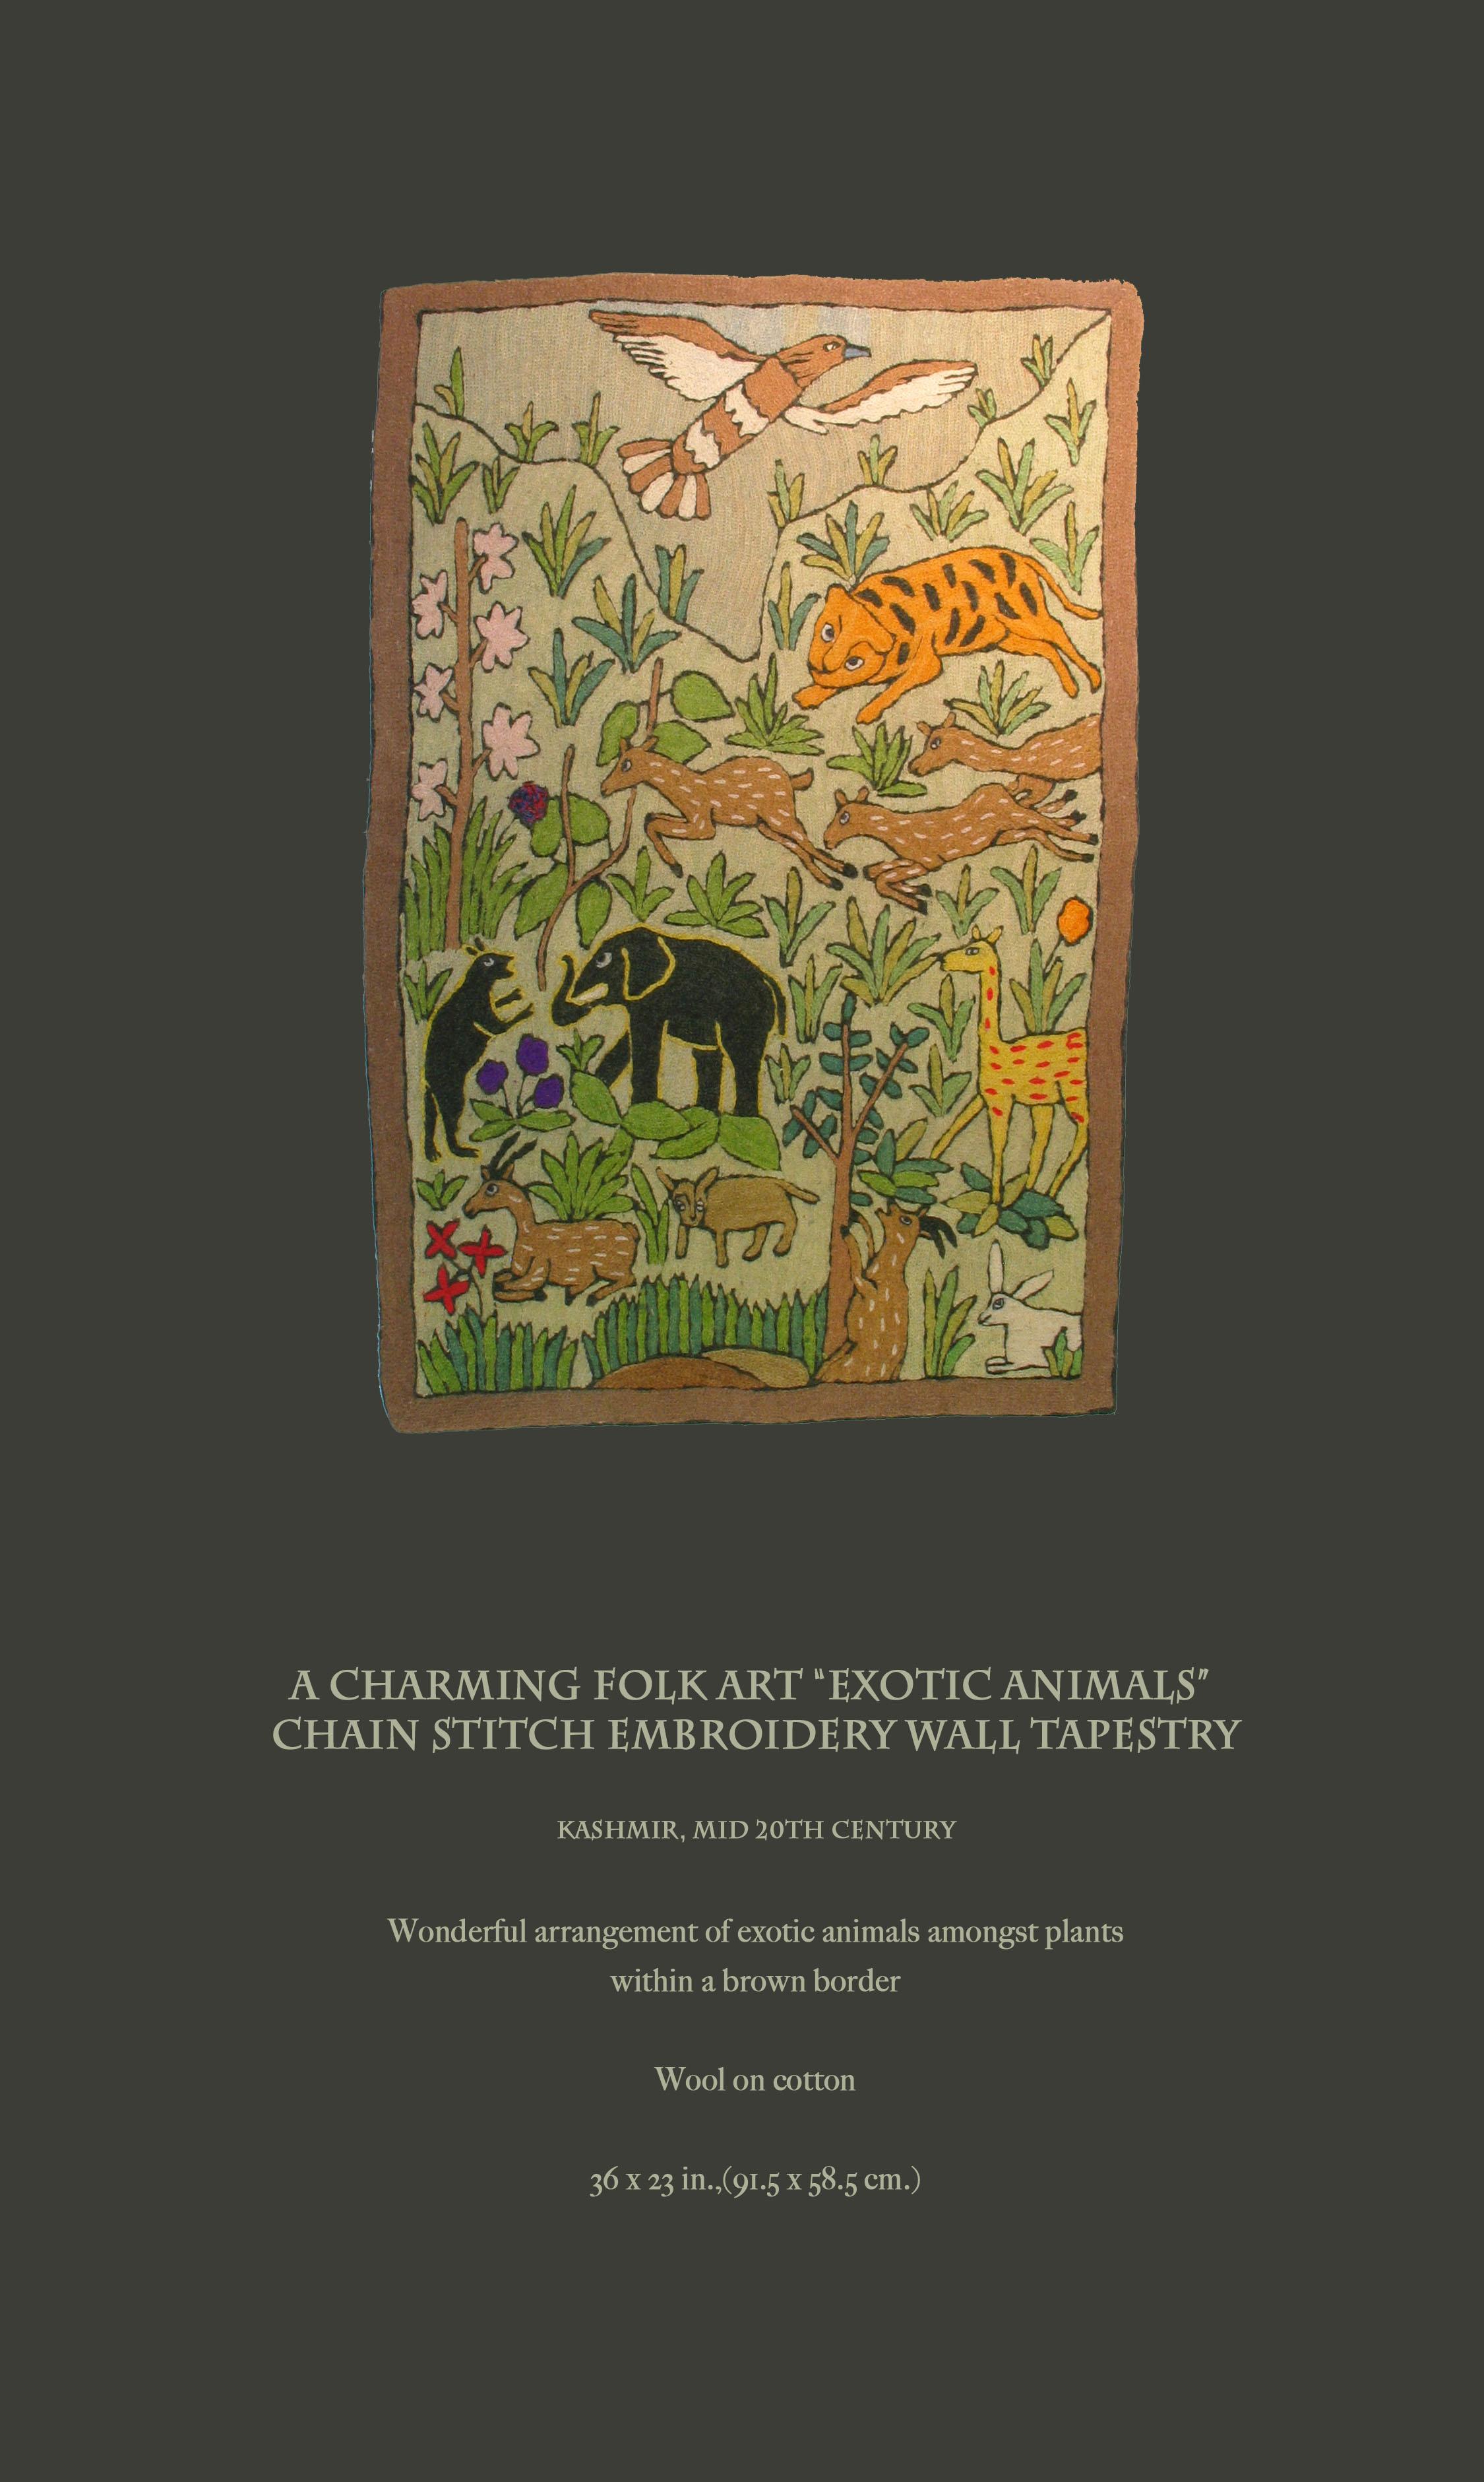 A charming Folk Art “exotic animals”
Chain stitch embroidery wall tapestry

Kashmir, mid-20th century

Wonderful arrangement of exotic animals amongst plants
within a brown border.

Wool on cotton.

Included is a photo b & w man photo for